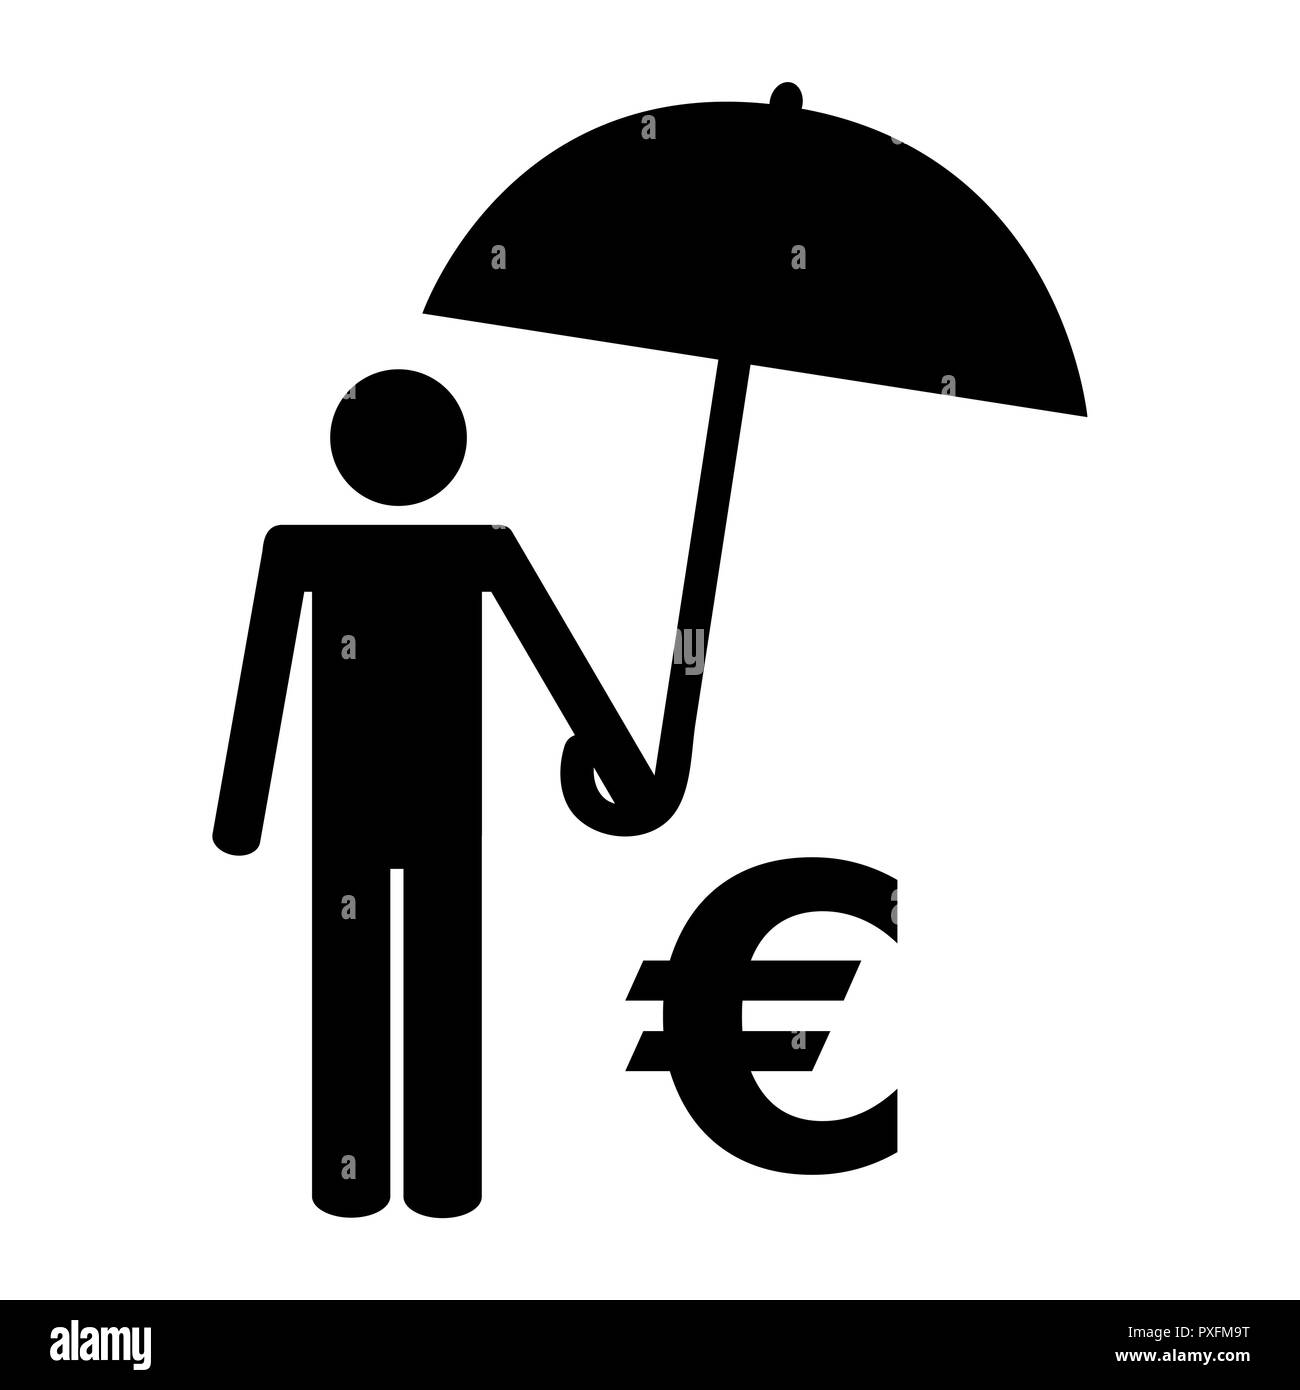 man with umbrella and euro pictogram vector illustration EPS10 Stock Vector